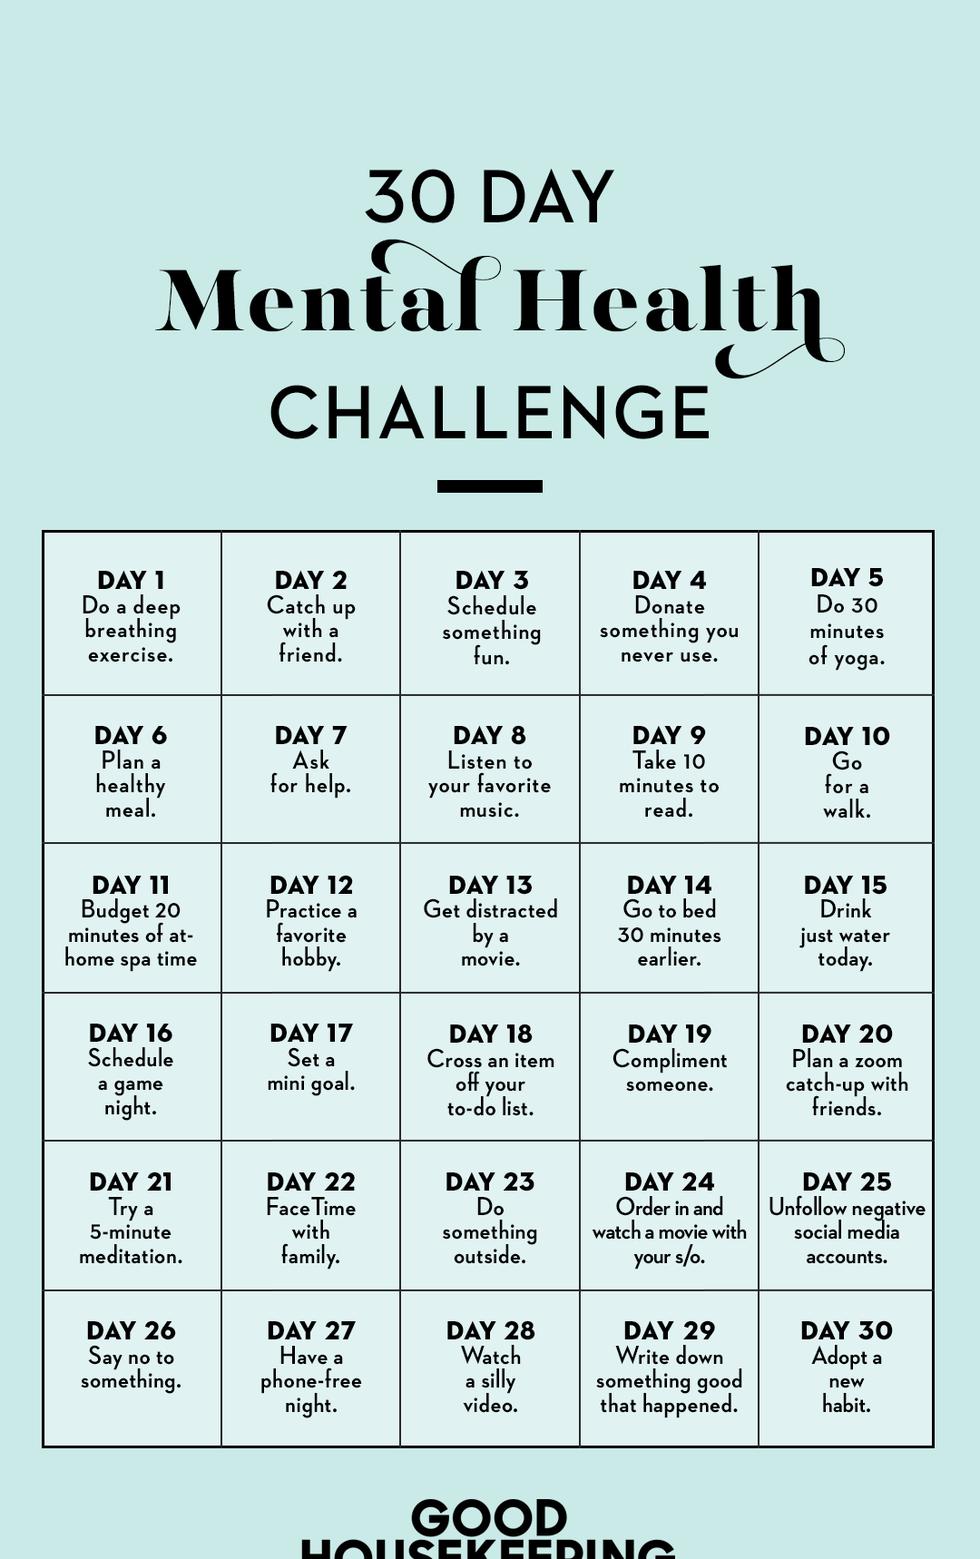 How To Do A 30 Day Mental Health Challenge This Wellness Plan Can